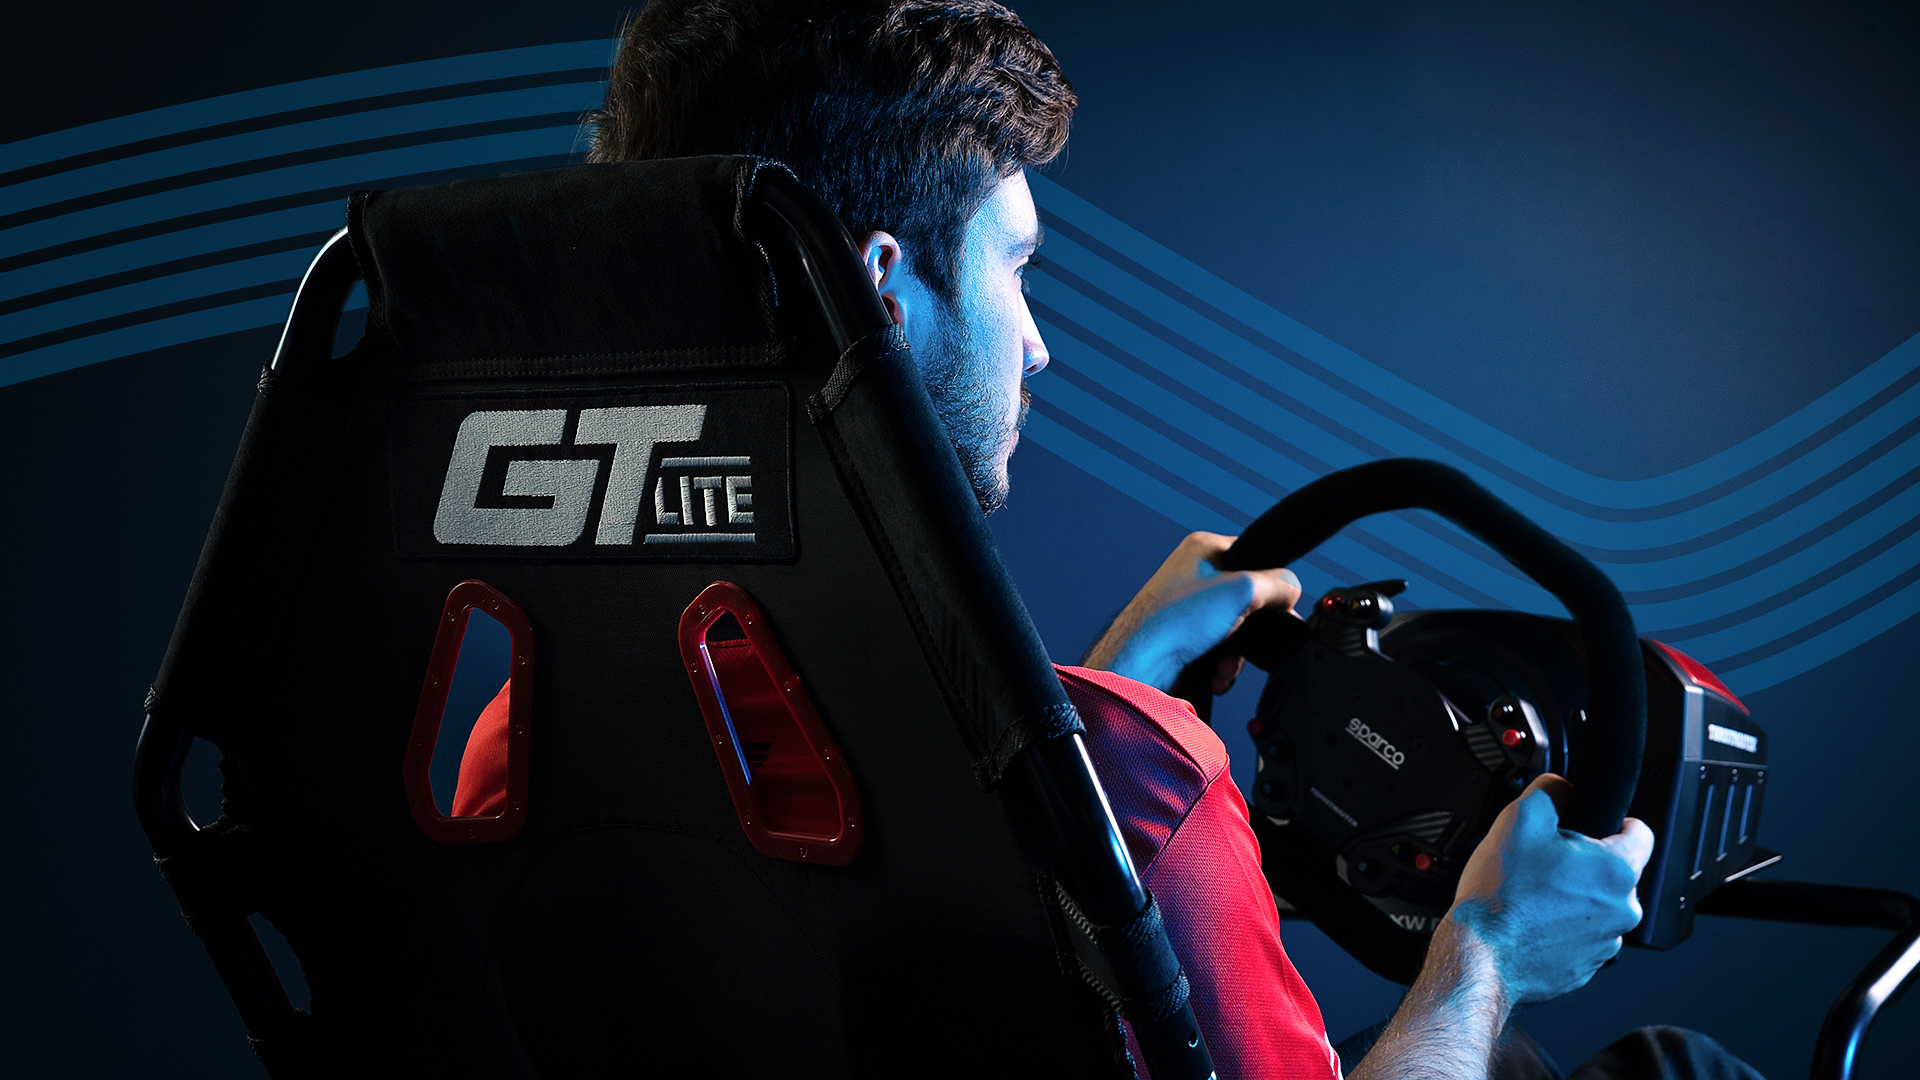 Gt Lite Prduct Vieo Cover